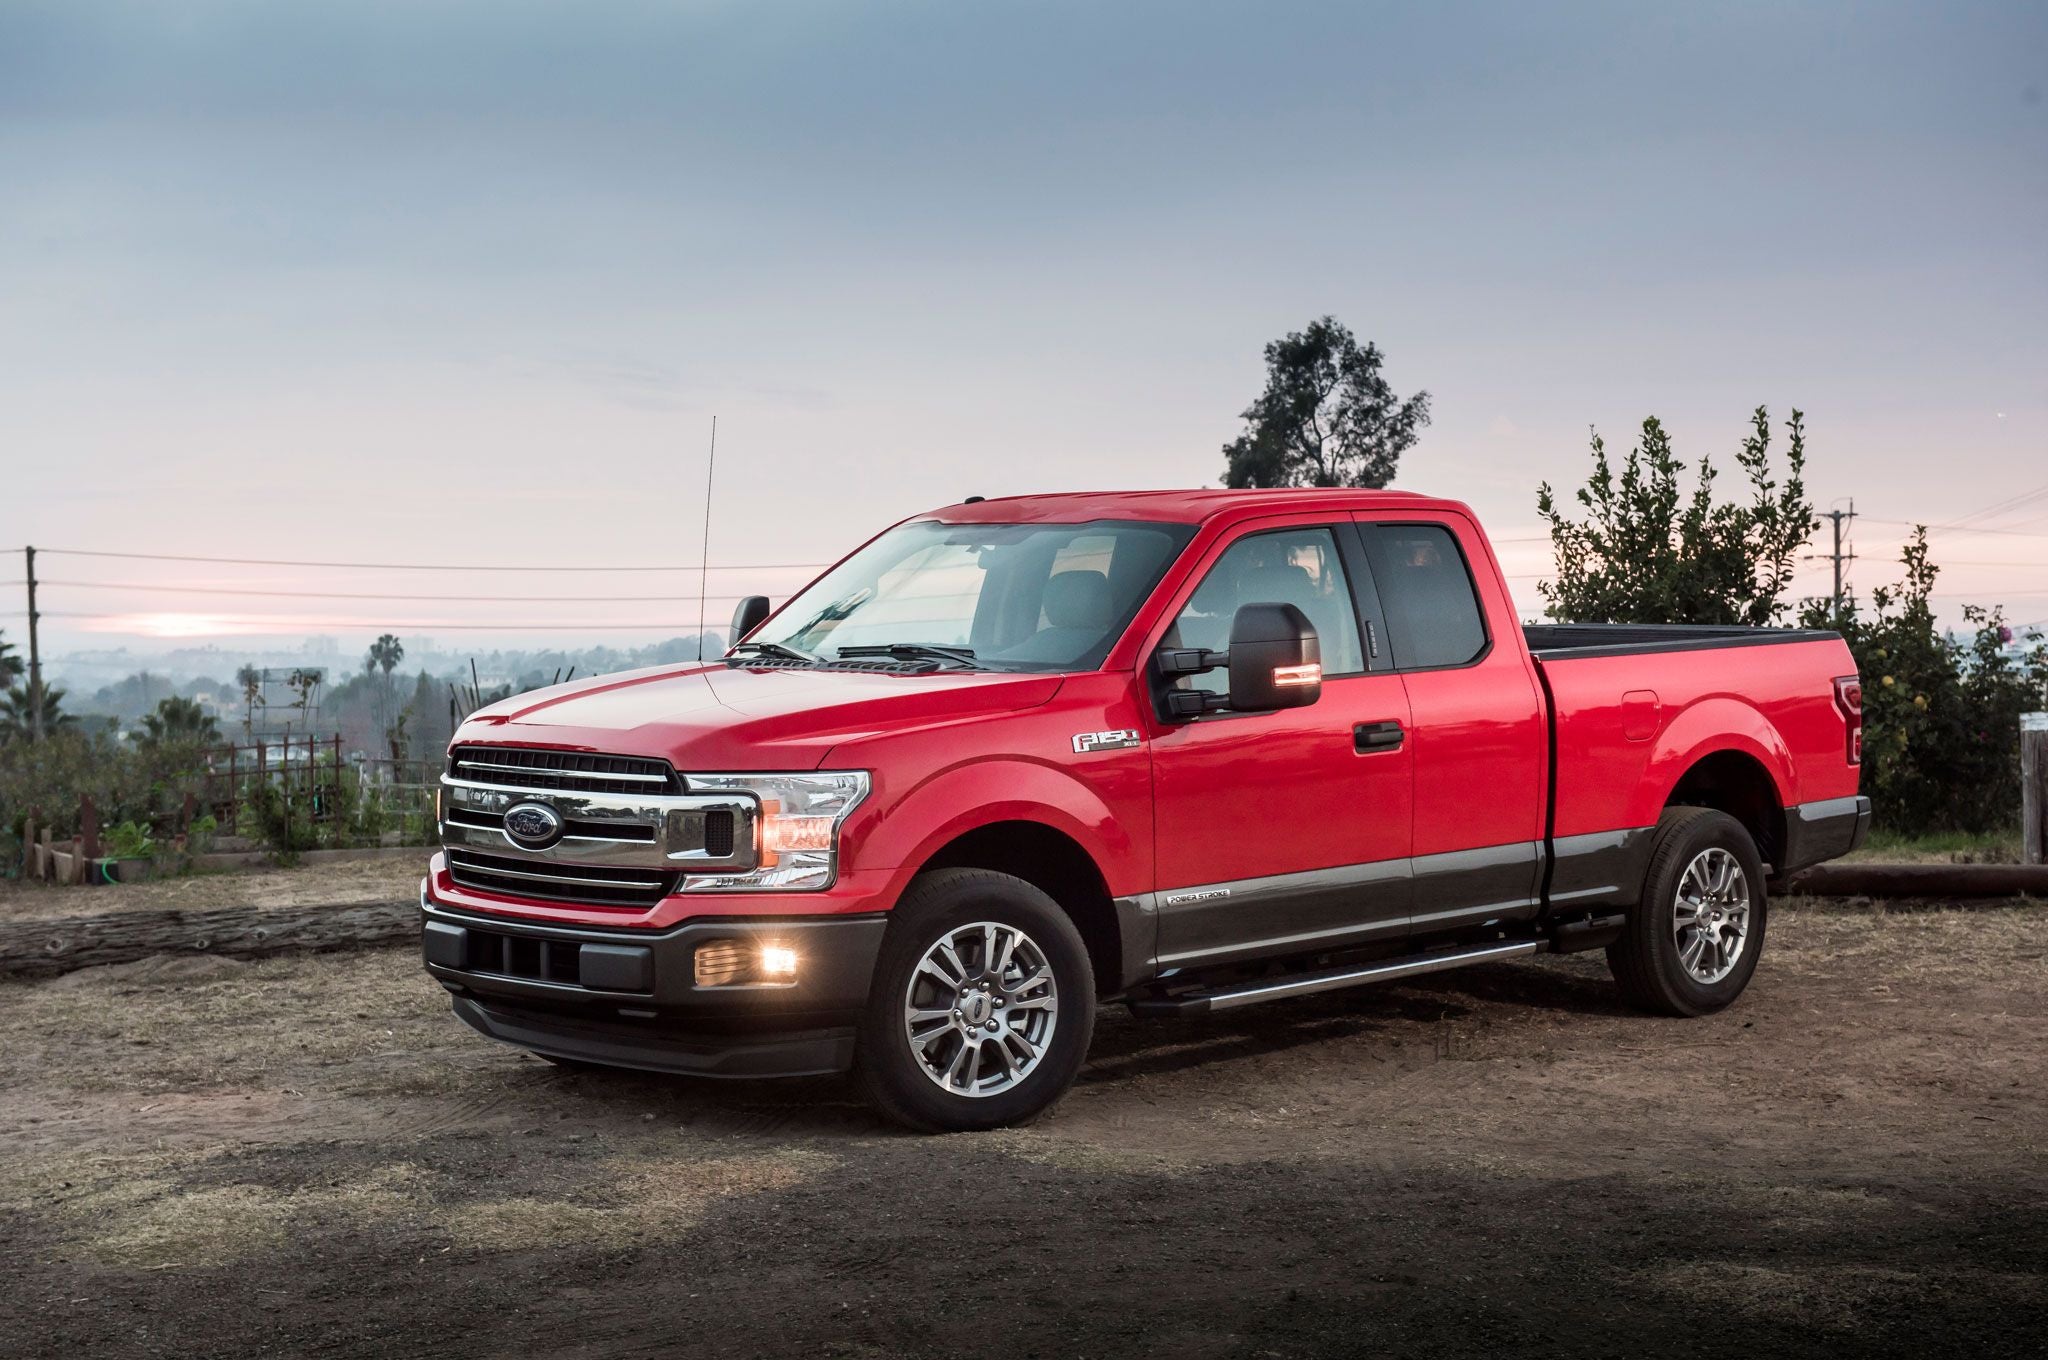 Ford announces new 2018 F-150 with diesel engine